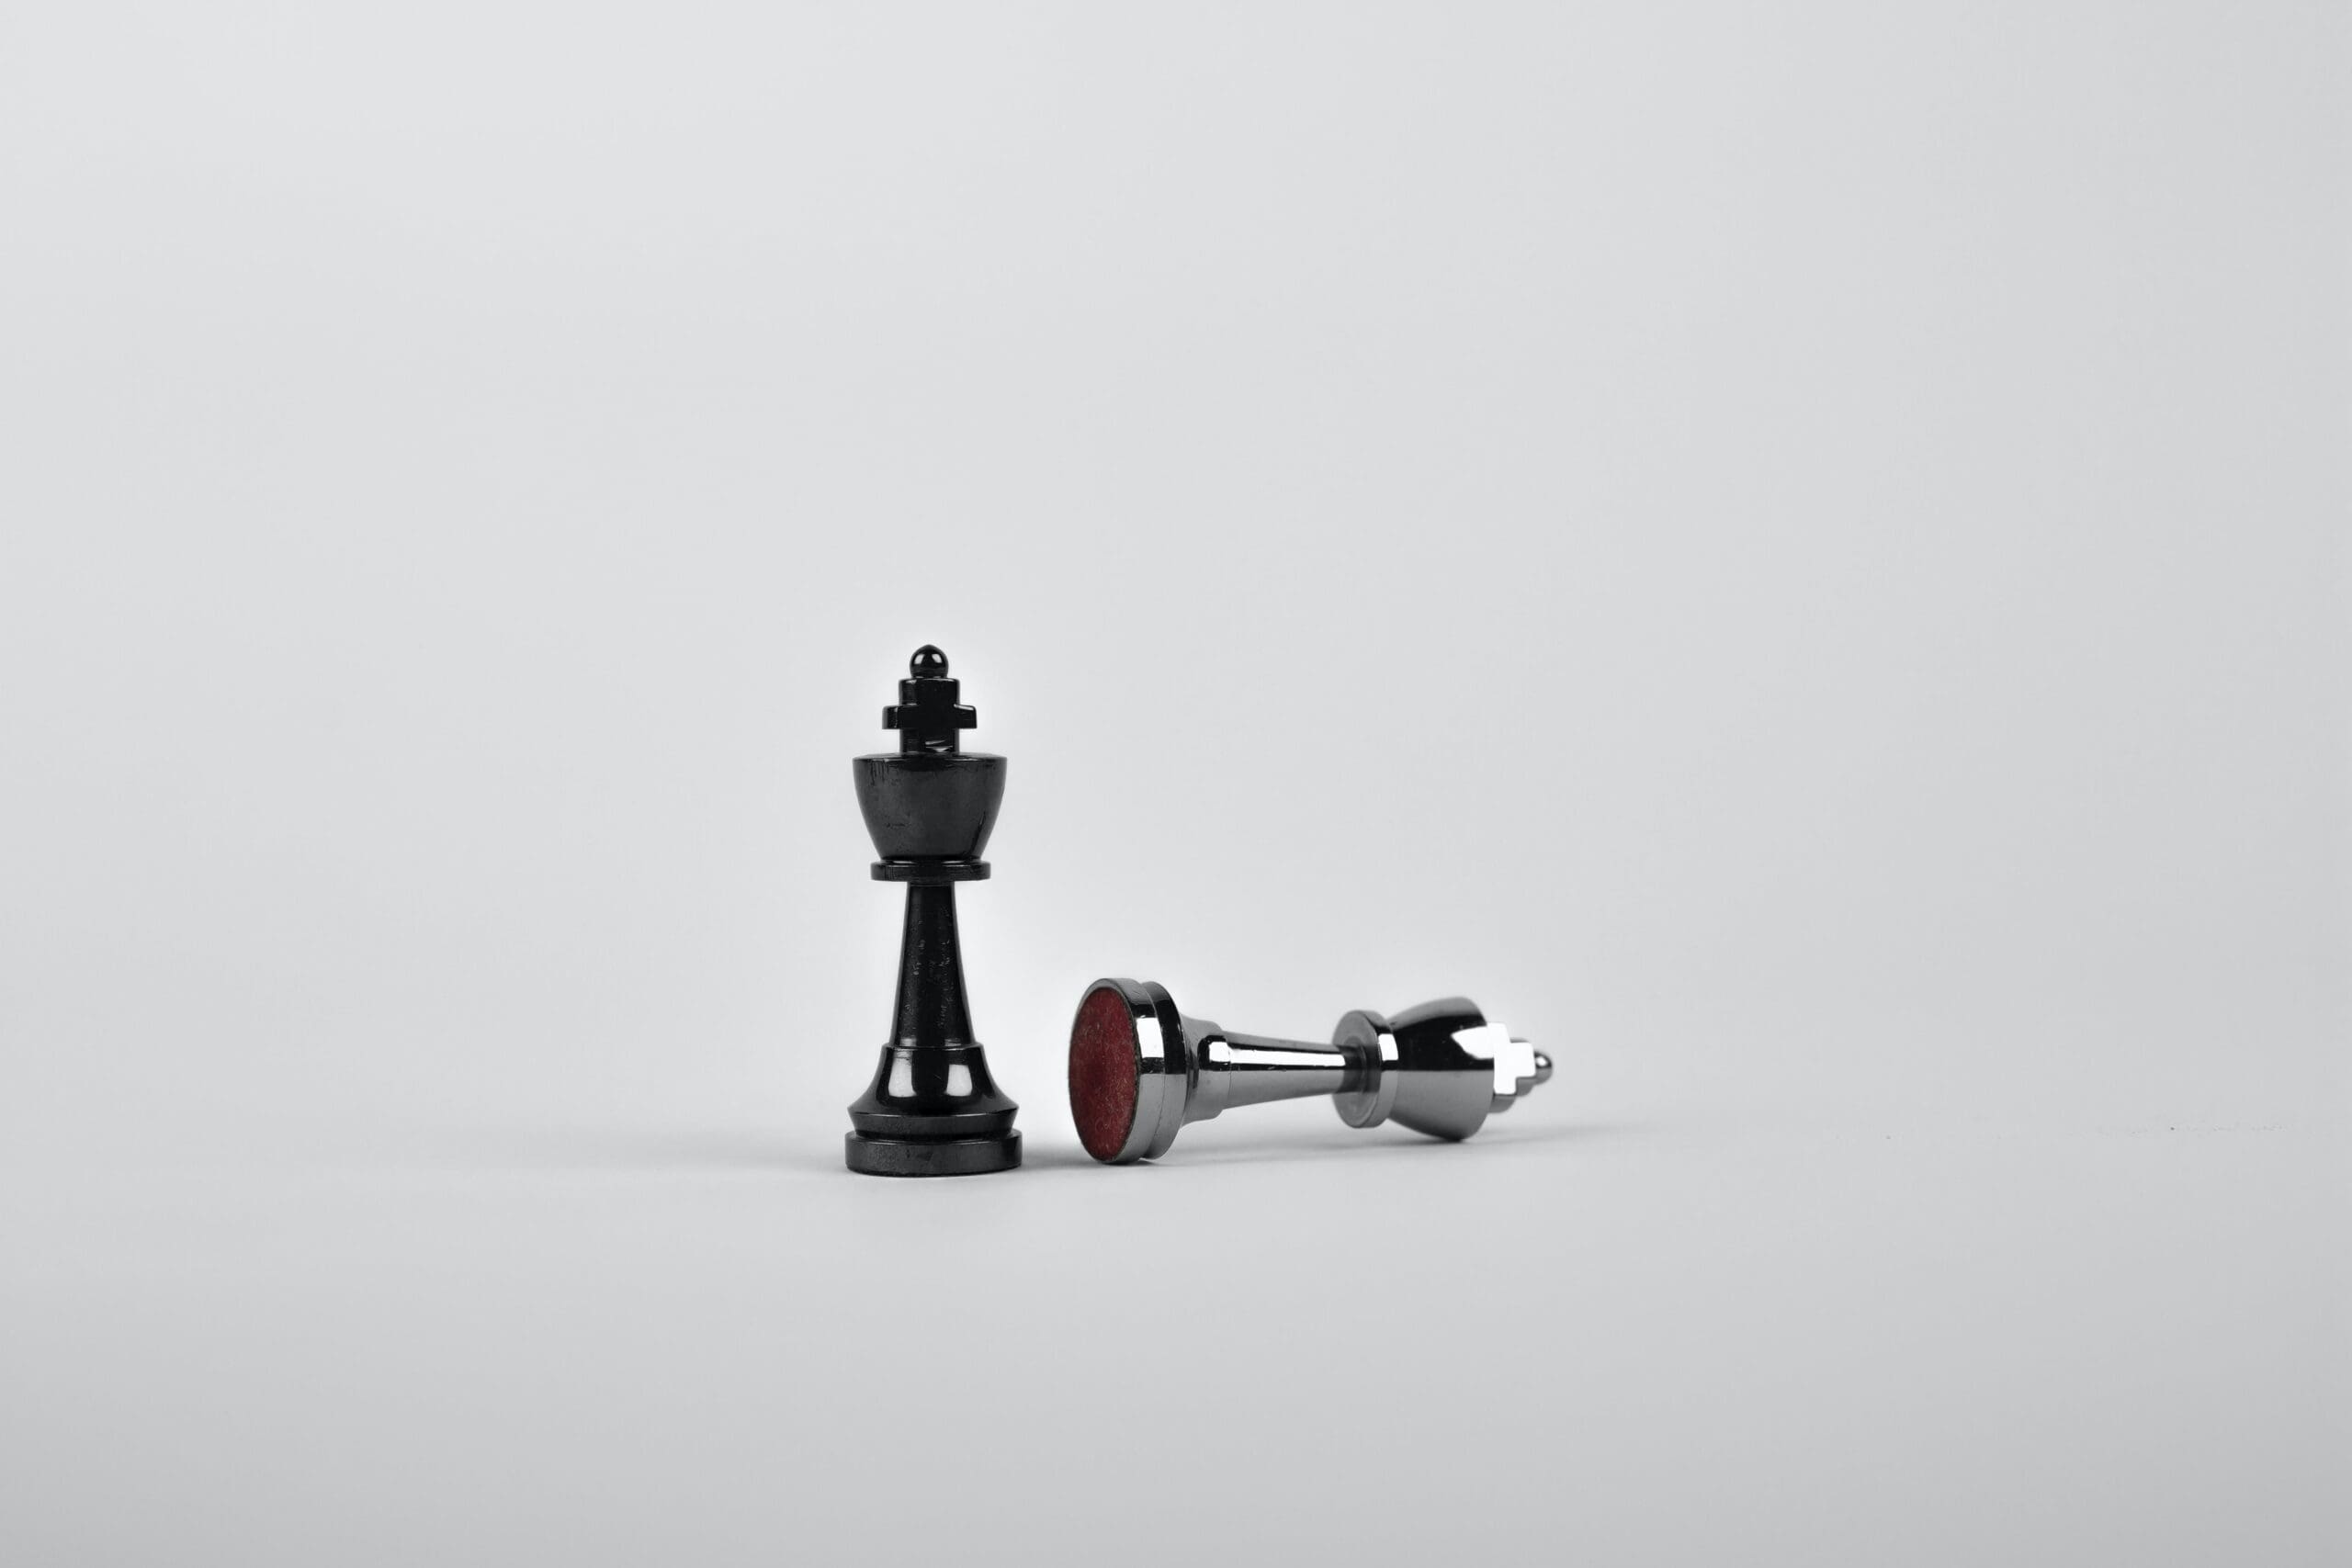 A black king chess piece next to a toppled silver chess piece